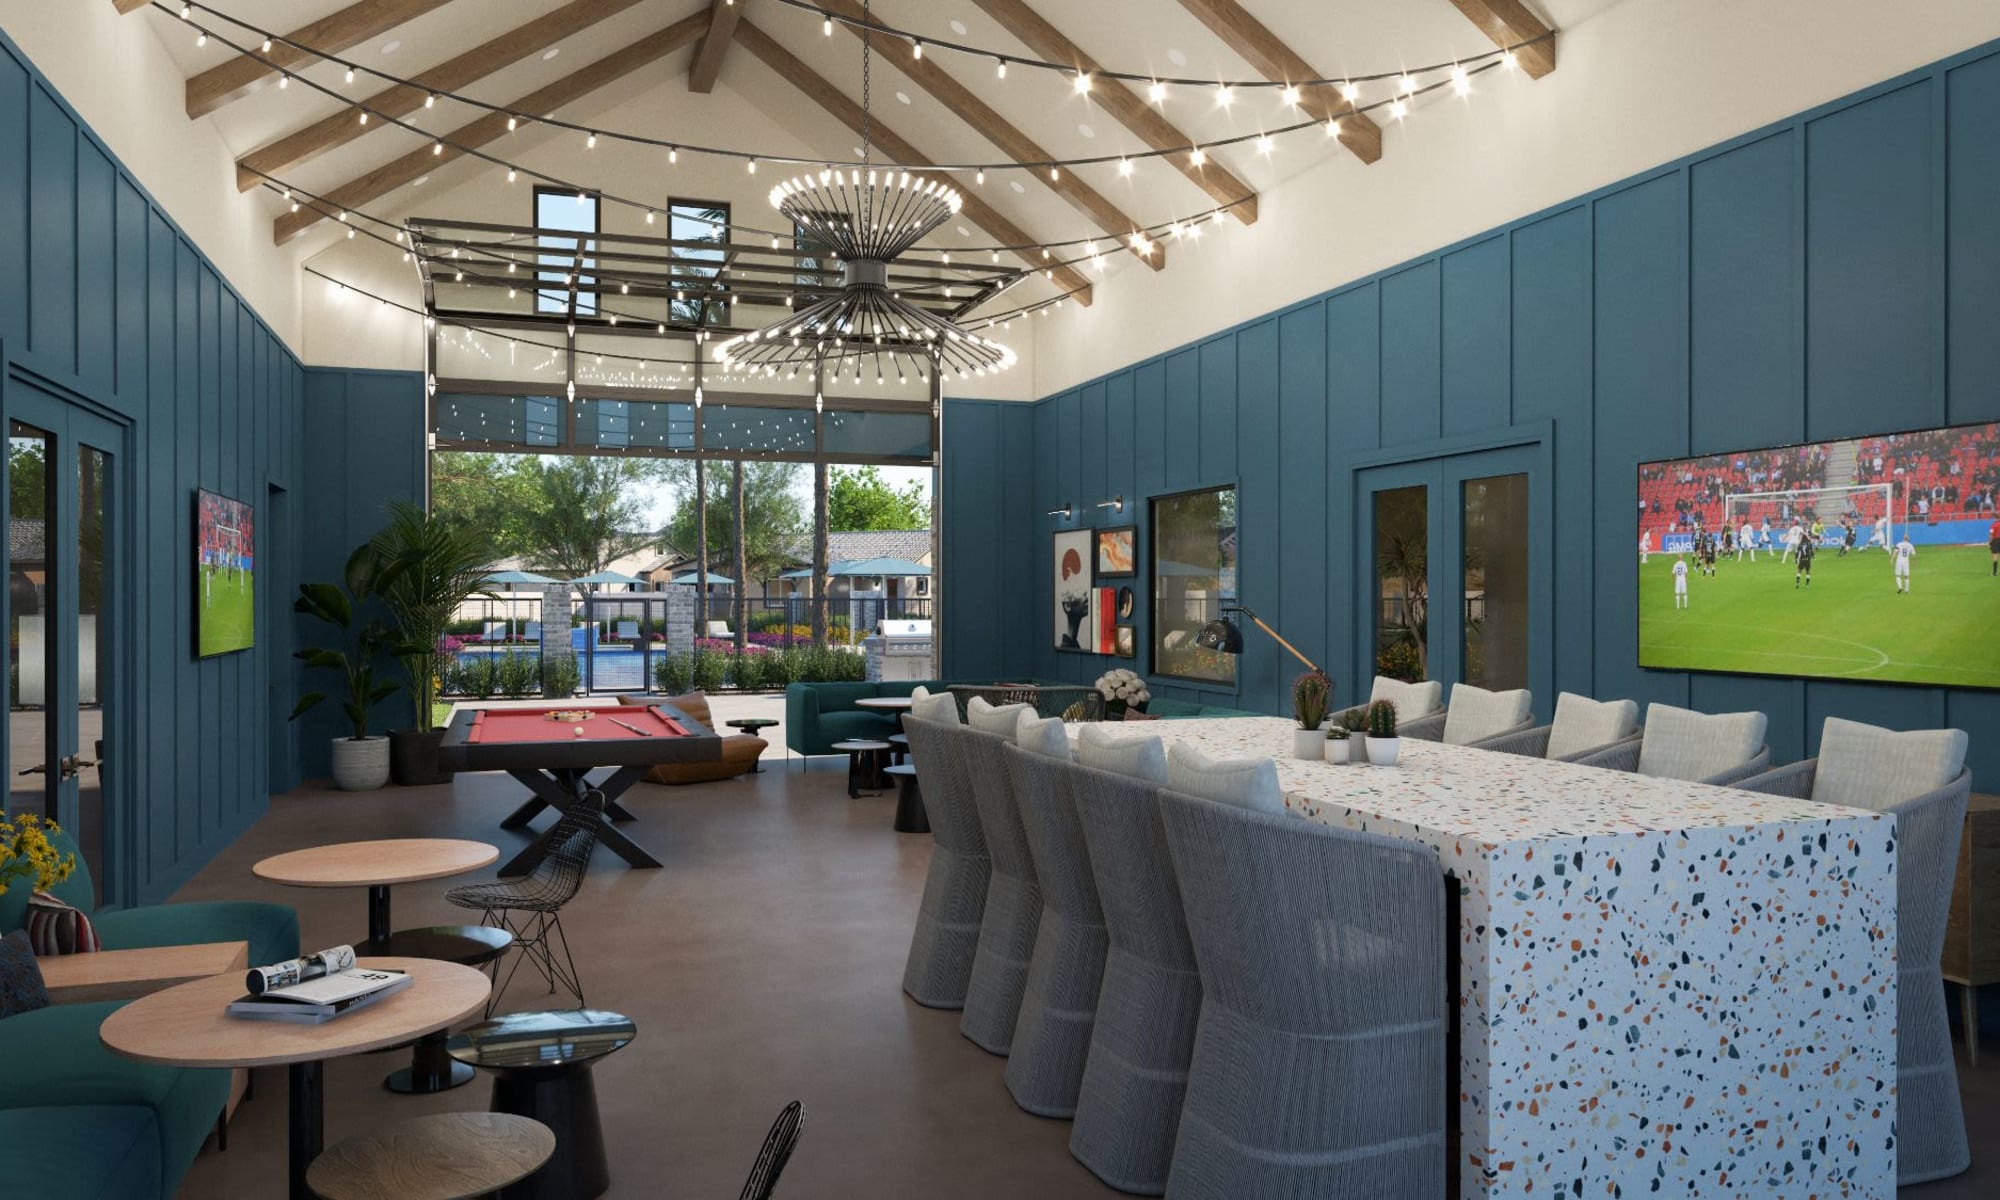 Cool clubhouse at FirstStreet Ballpark Village in Goodyear, Arizona